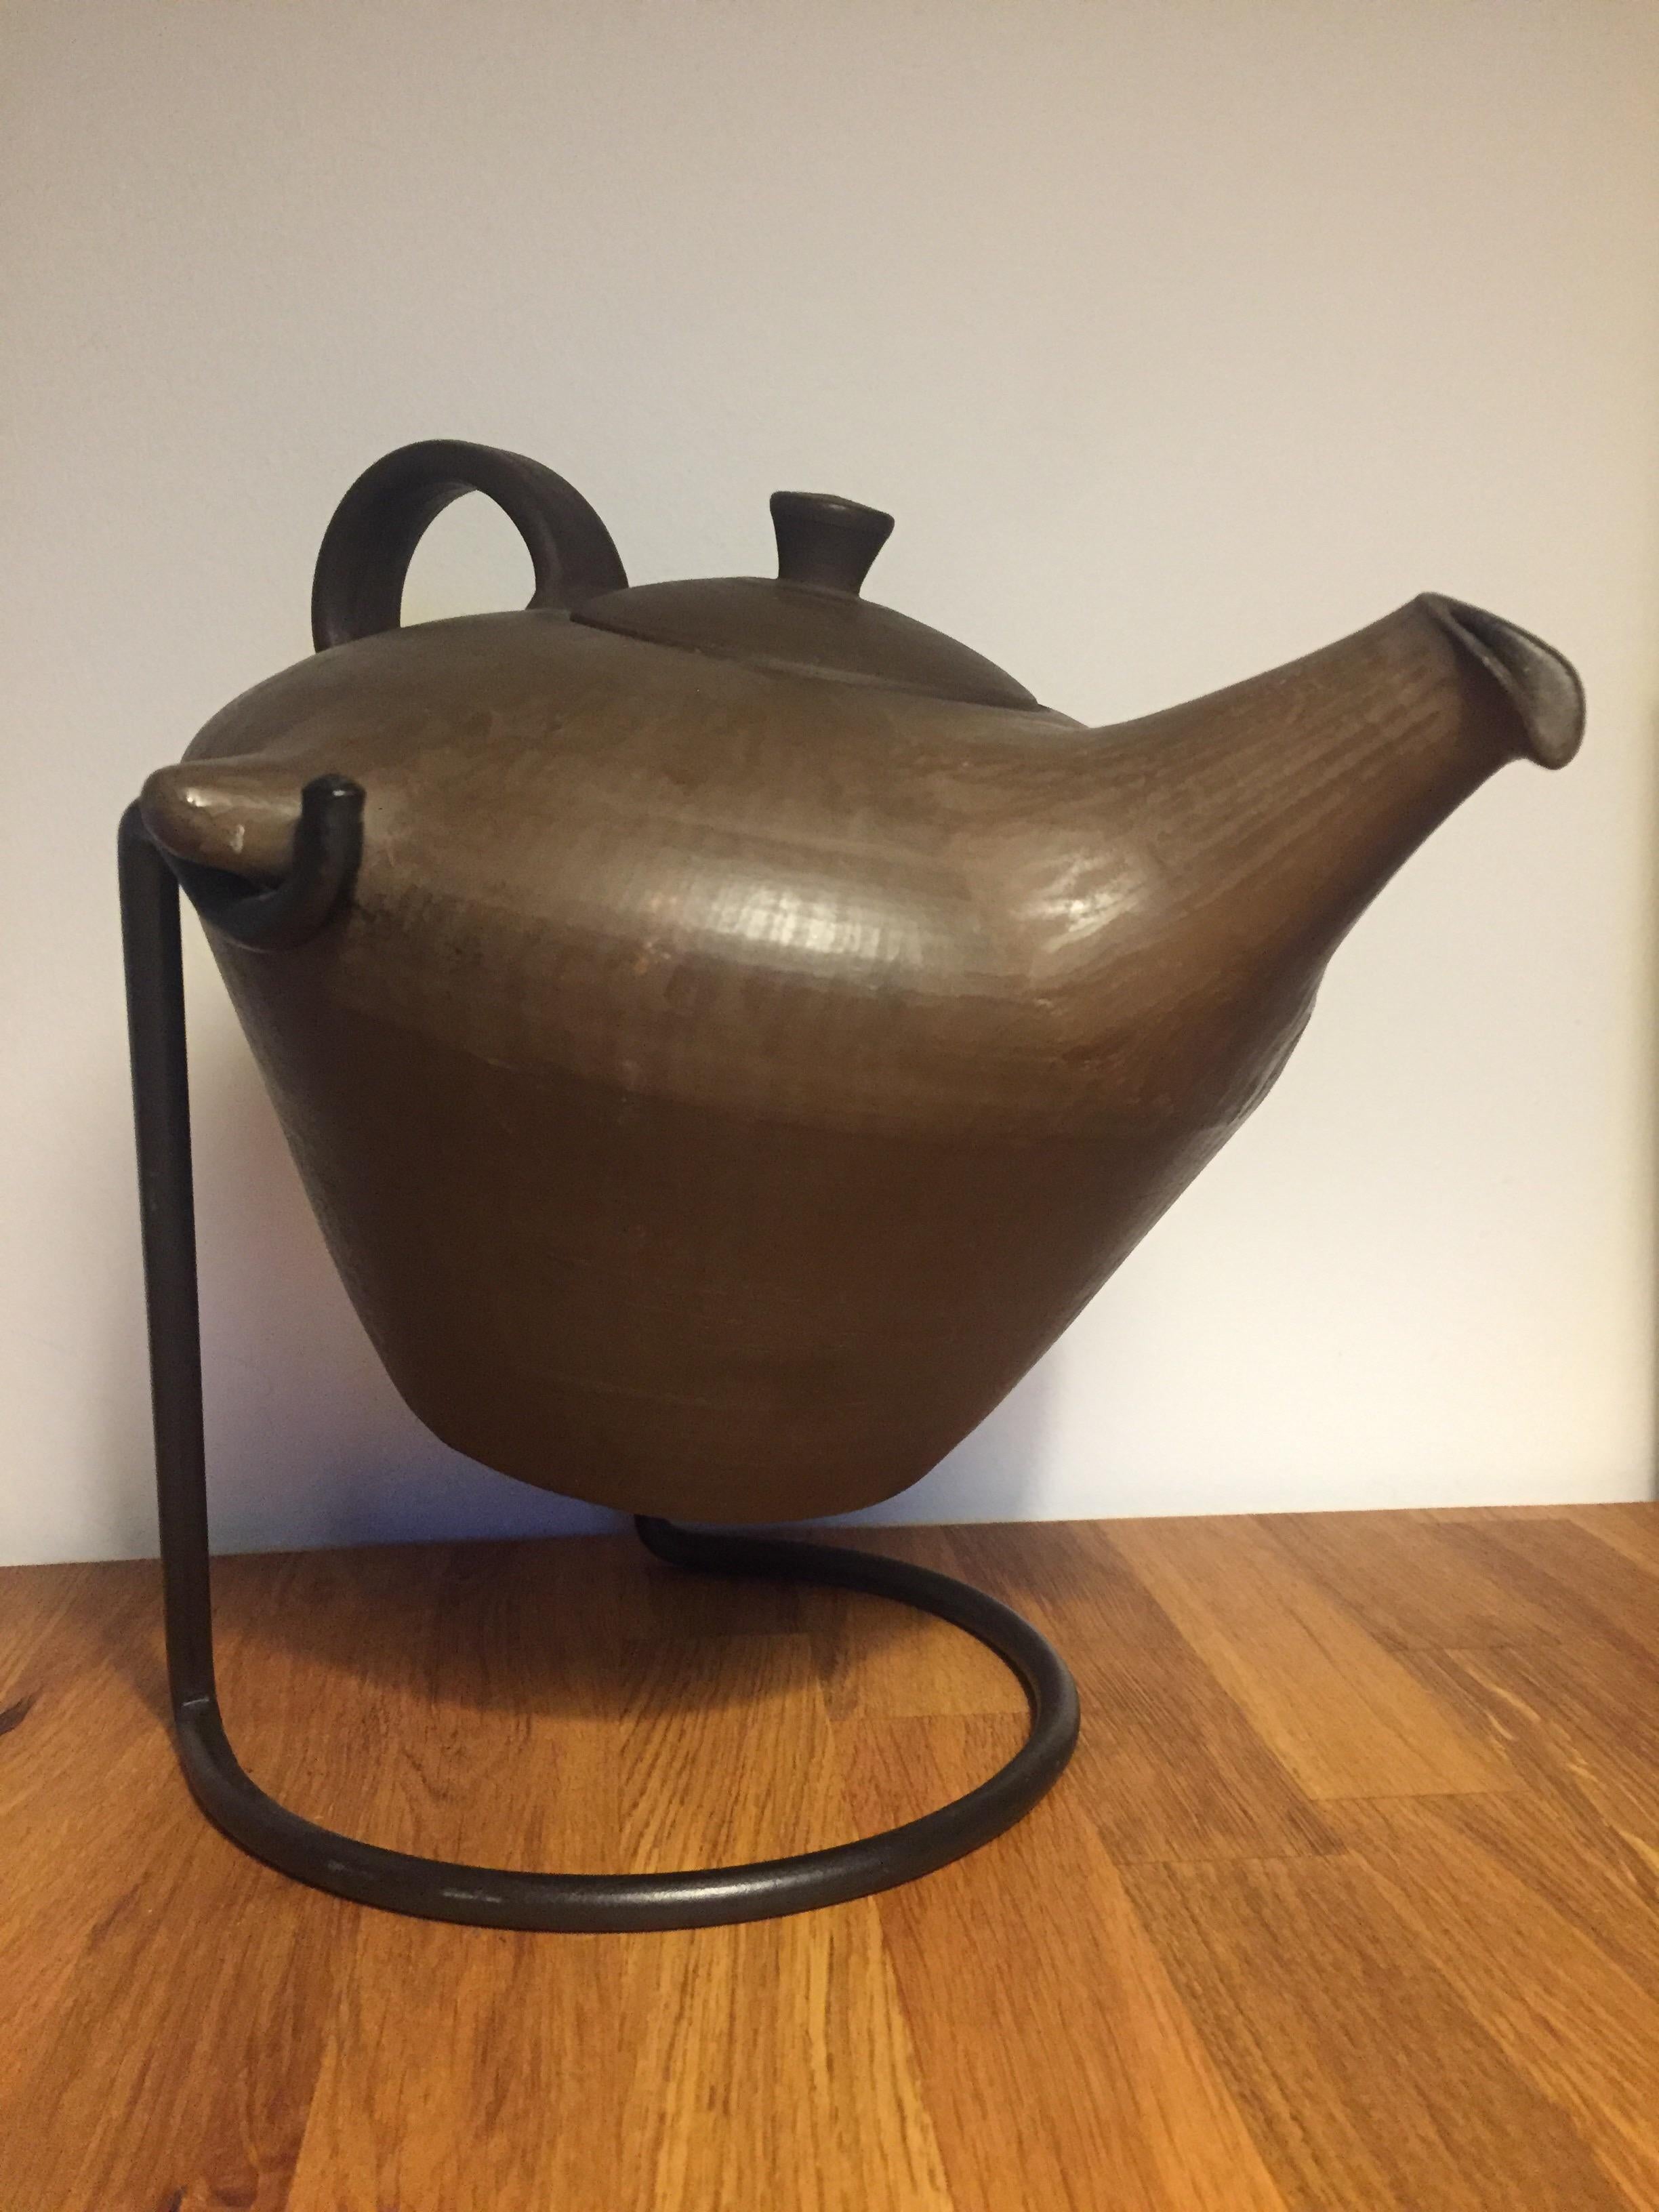 Scandinavian ceramic teapot with smaller minor structural damages but still in full working condition.